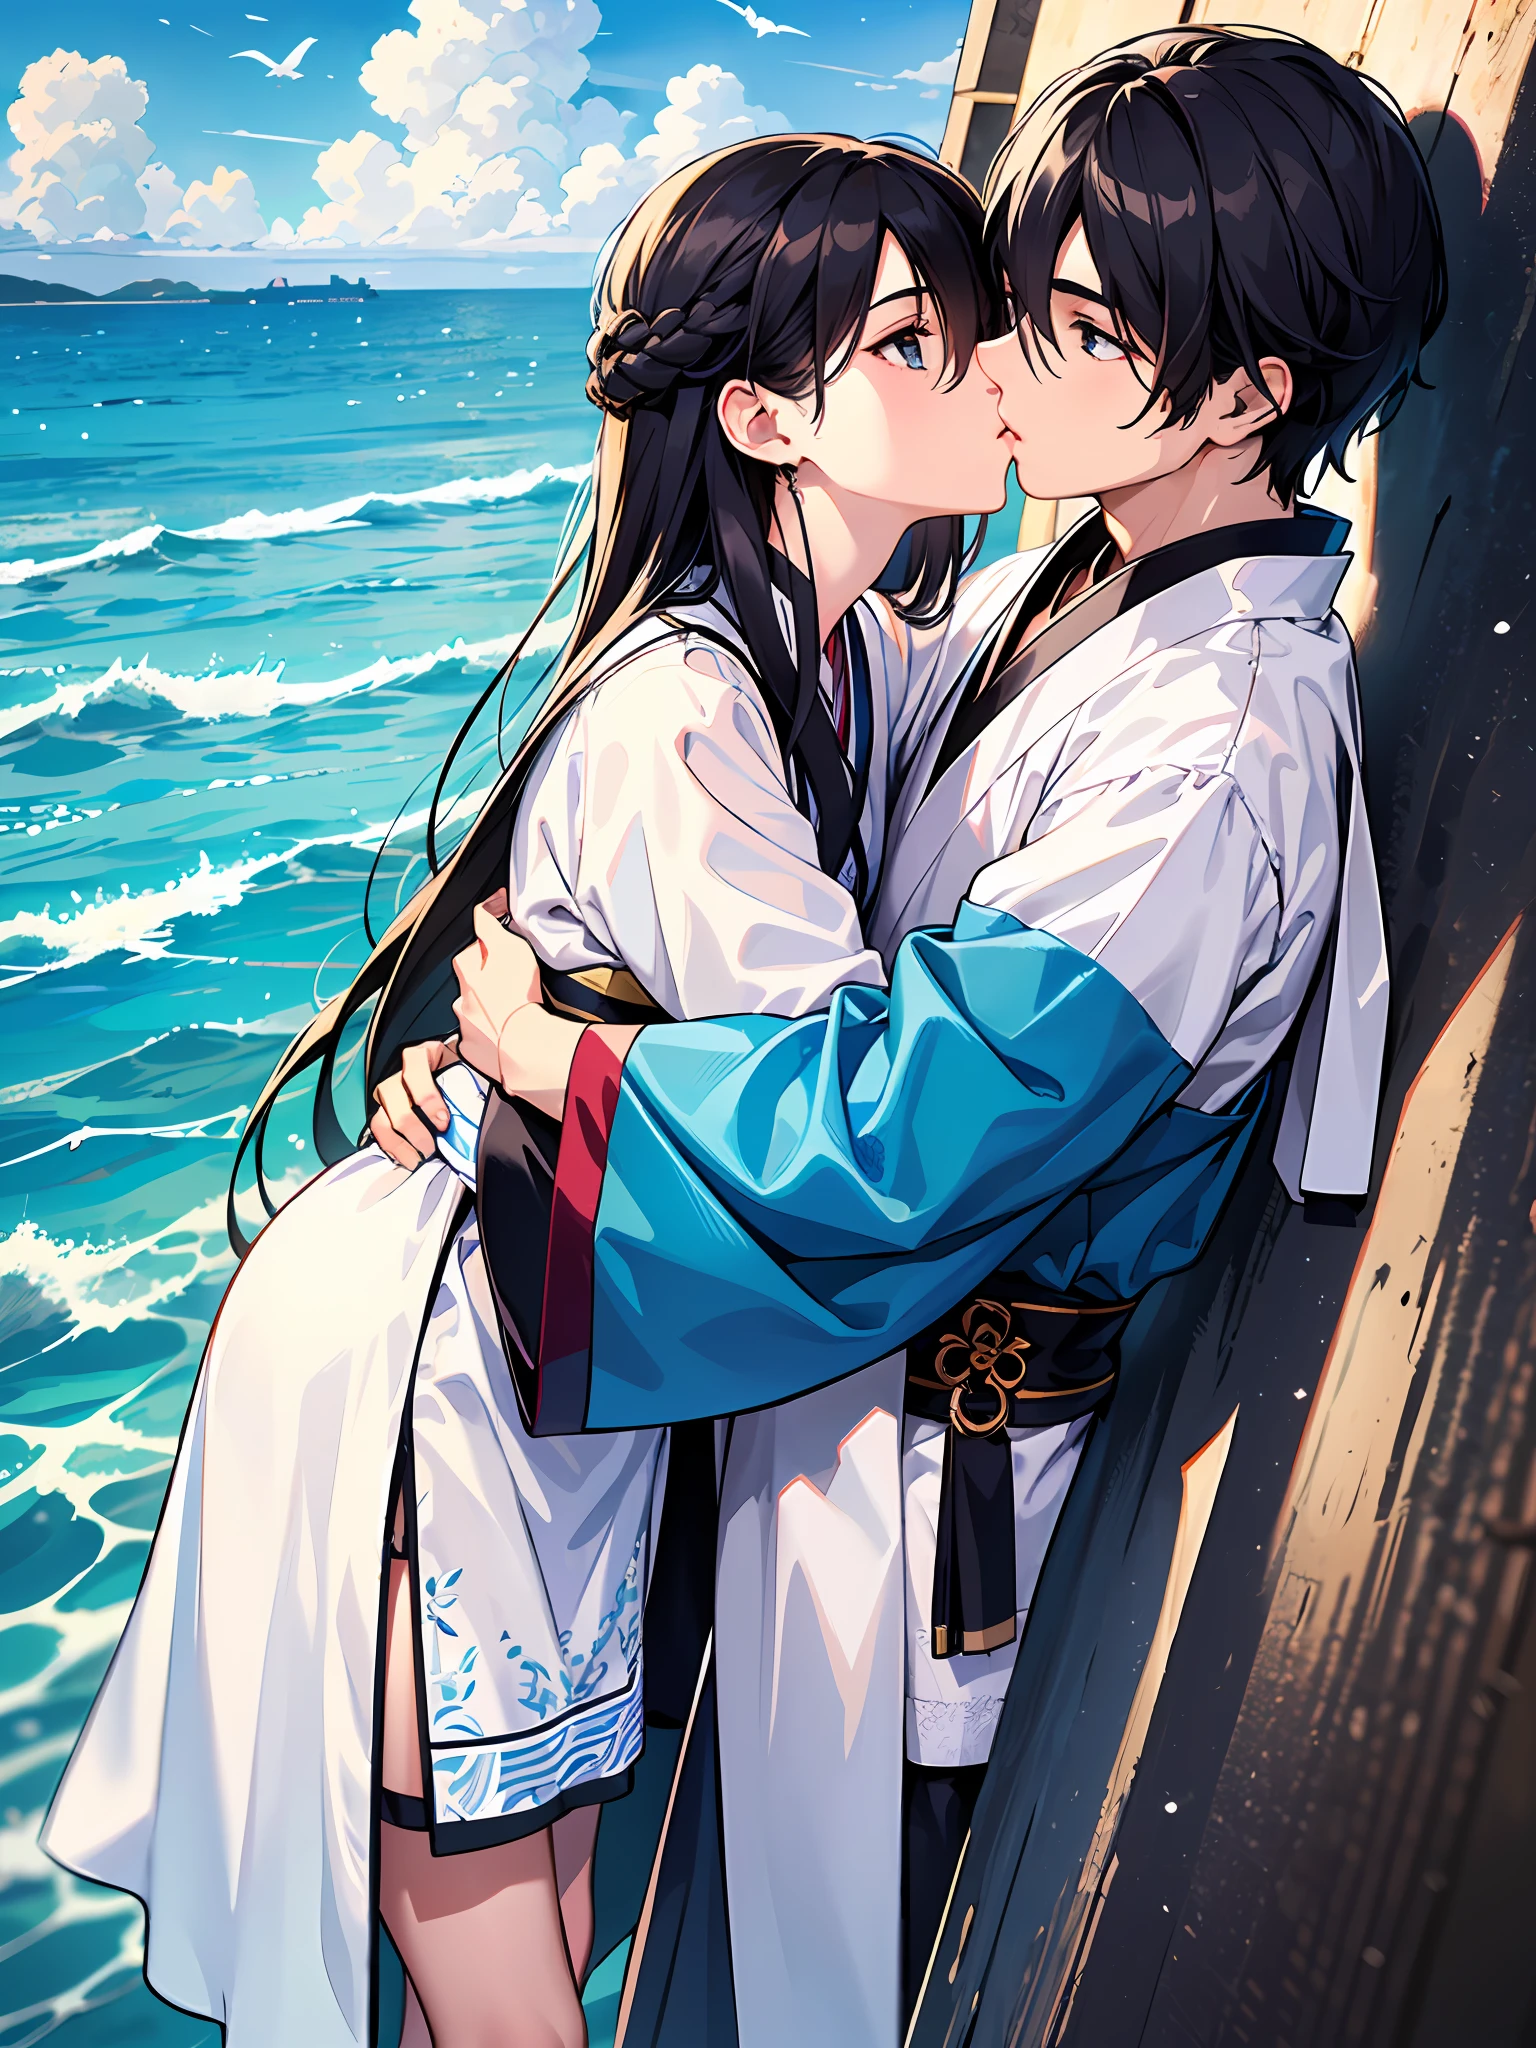 Center, Realistic, Masterpiece, Medium Scene, Full Body, Hyperfocal, Best Quality, 8K, Crazy Detail, Intricate Detail, Ultra Detail, Ultra Quality, High Detail, High Detail, 2people\(1boy and 1girl\), Hug, Side Face, ((Kiss::1.2)), ((Affectionate Eyes:::1.2)), Hanfu, Chinese Costume, Boy Wears Black, Girl Wears White Hanfu, Background Sea, Daytime, Blue Sky and White Clouds, Seagulls.